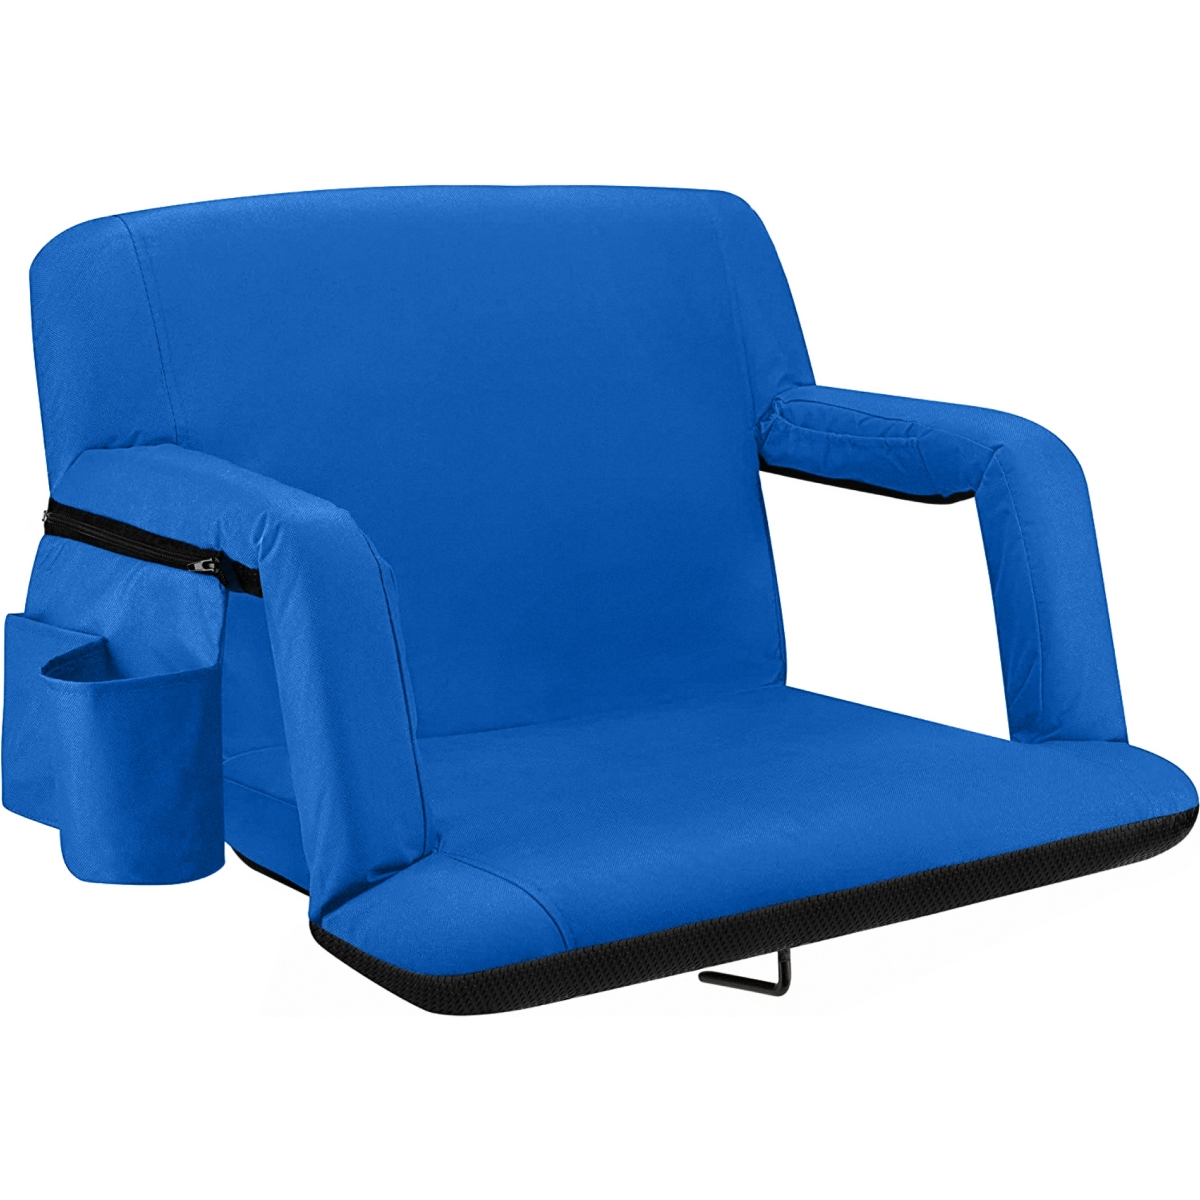 Reclining Stadium Seat - Waterproof Foldable Camping Chair with Extra Thick Padding and Wide Back Support - Royal blue